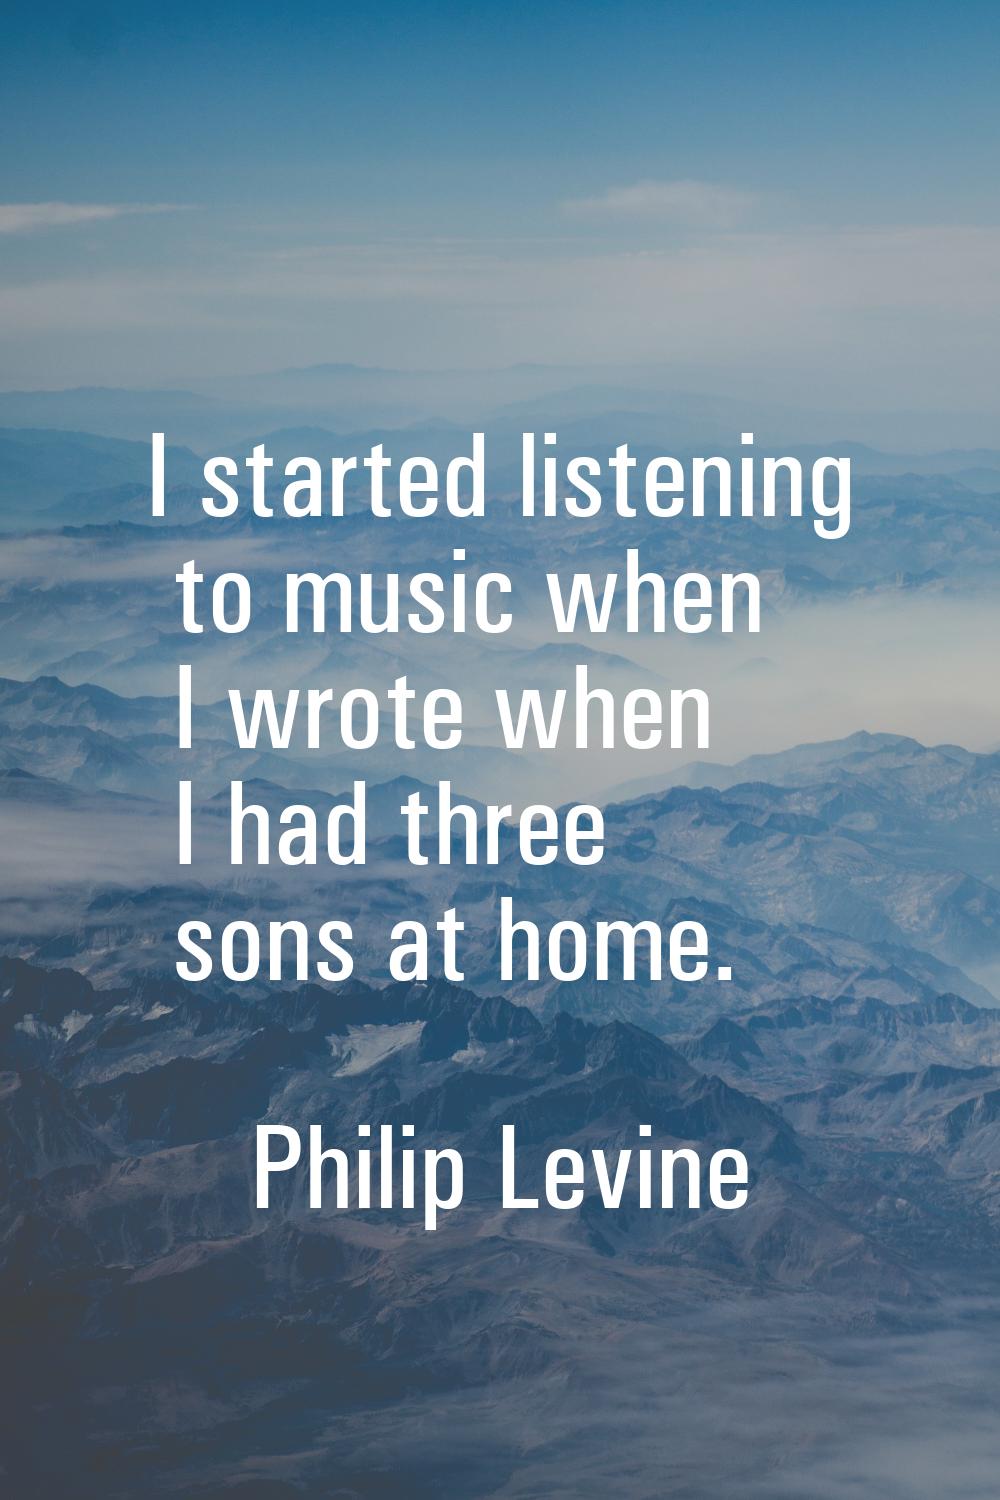 I started listening to music when I wrote when I had three sons at home.